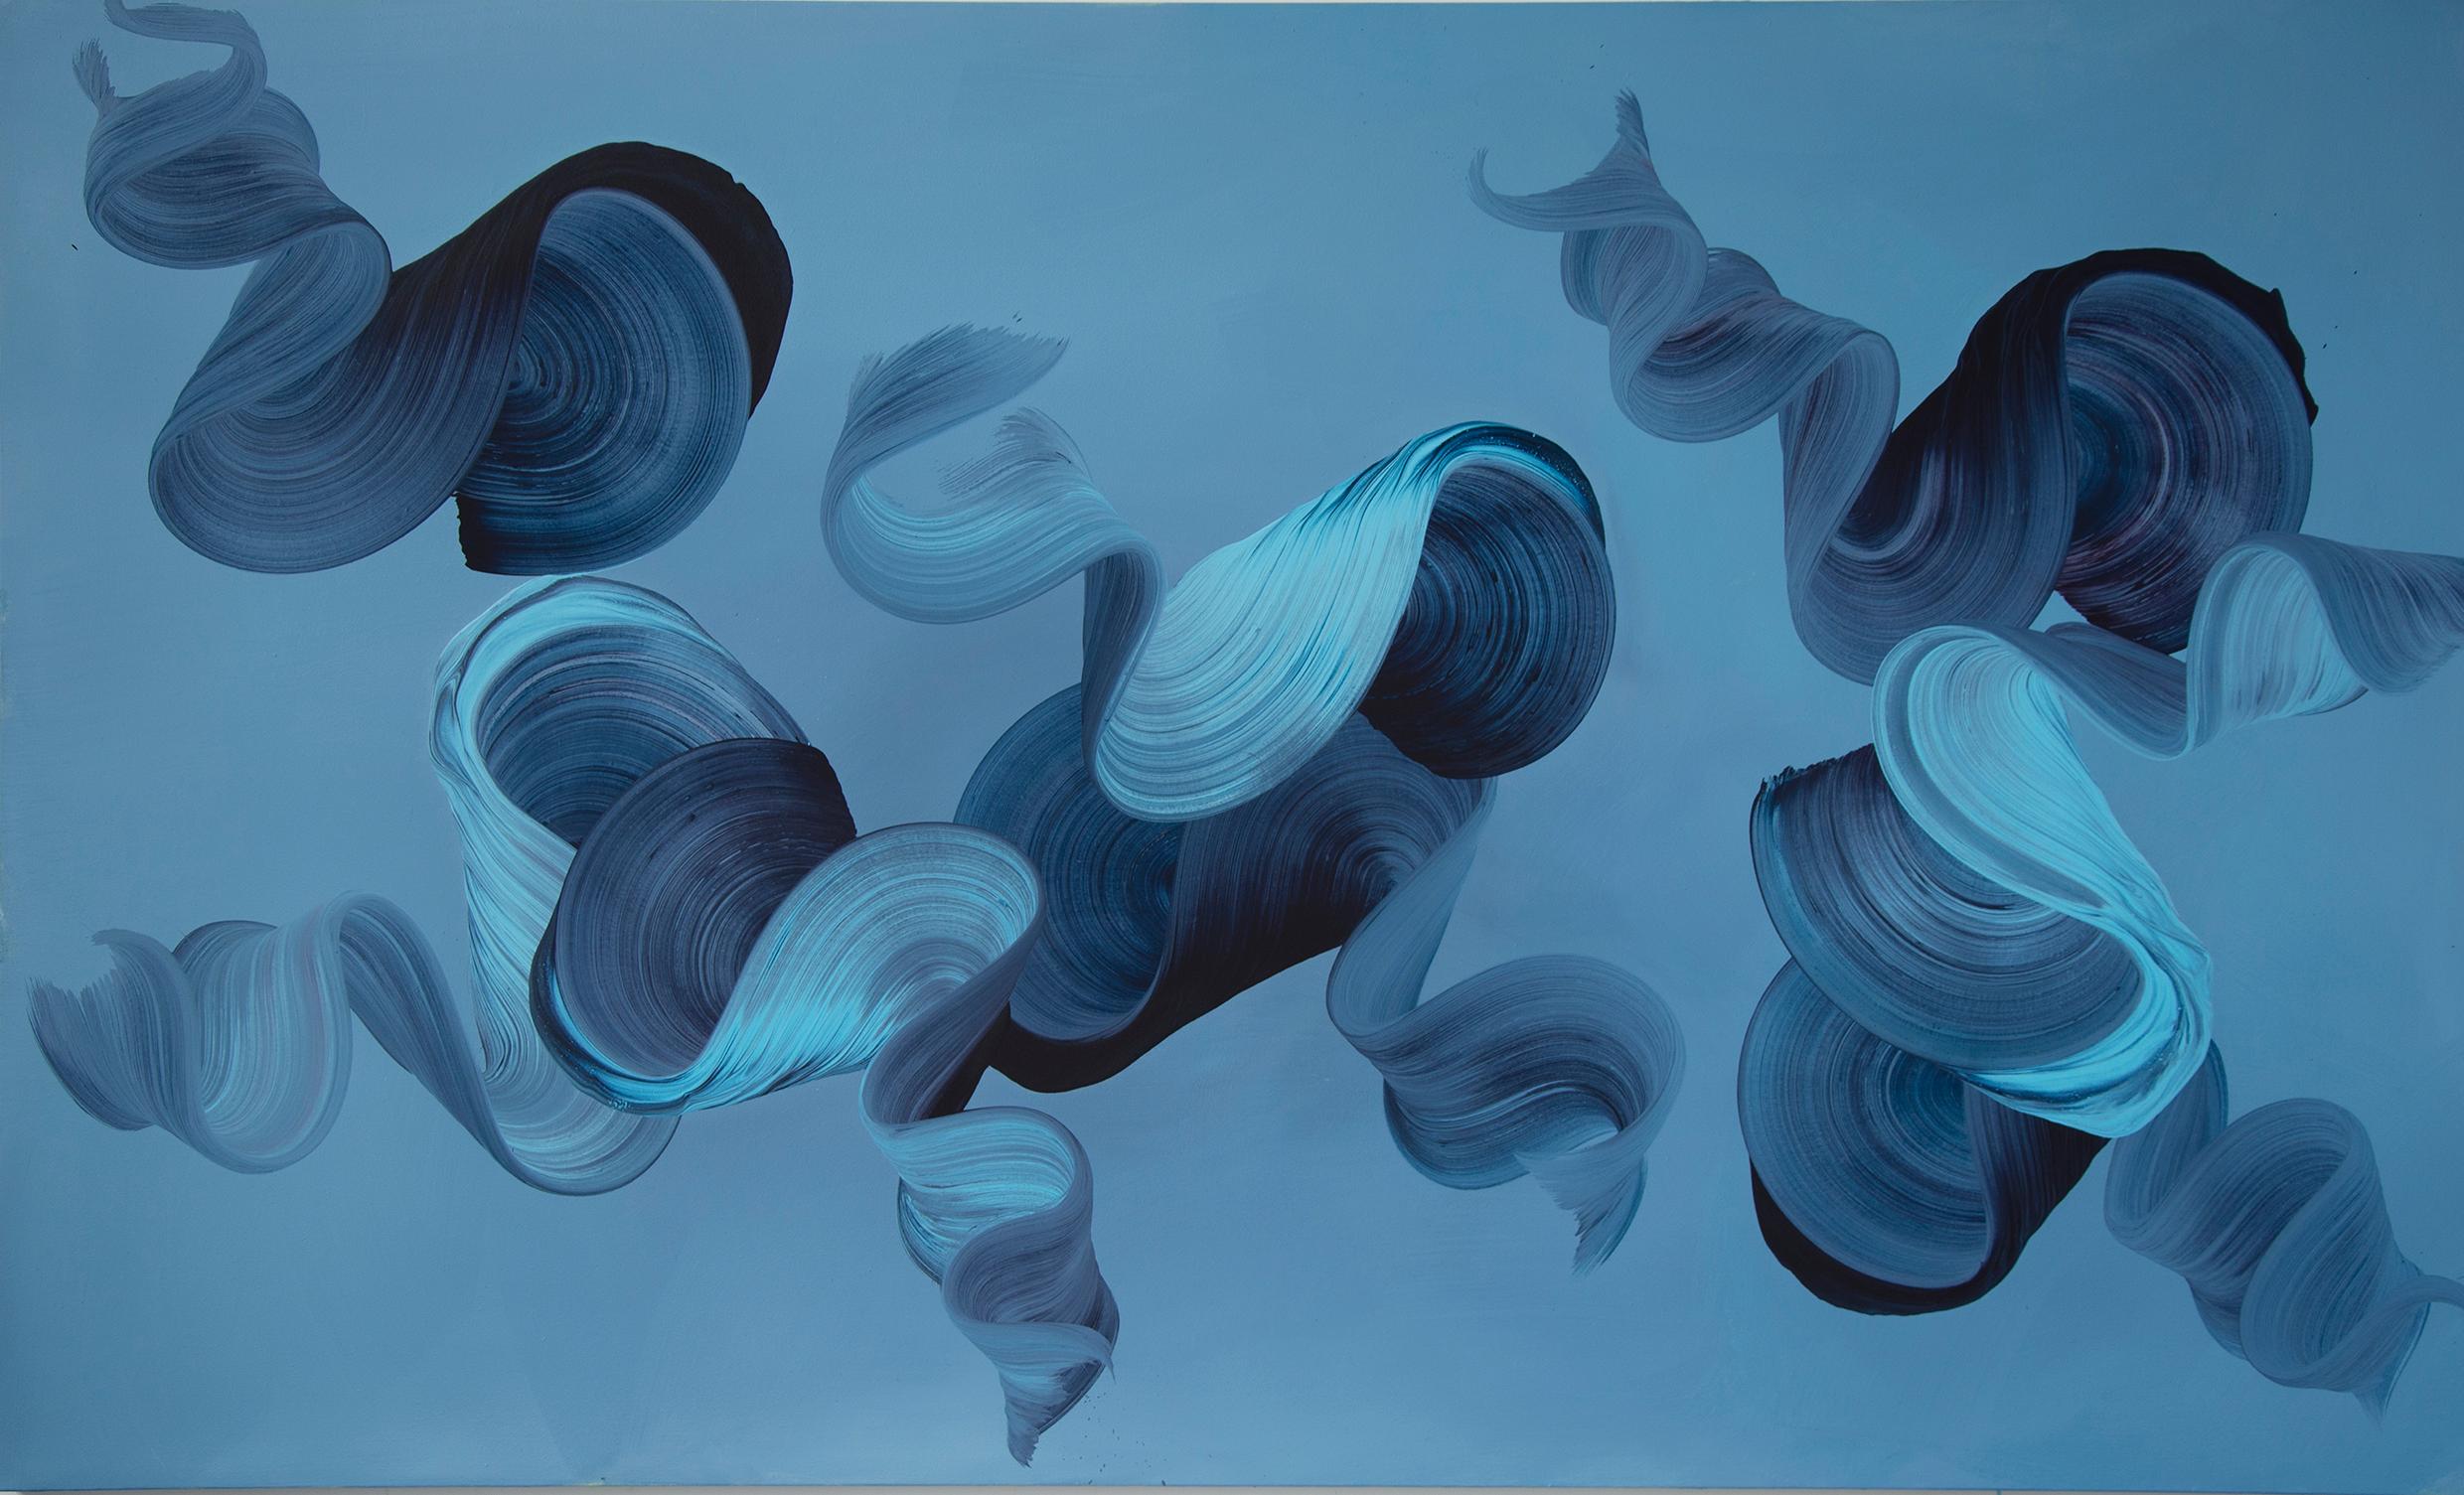 Dragica Carlin
Blue, series 4.
Oil on canvas
21st C original contemporary abstract painting by Dragica Carlin
Signed and dated on the back 2018.
Provenance: the artist
Condition: new

Dragica Carlin is a London based artist. She moved to London from